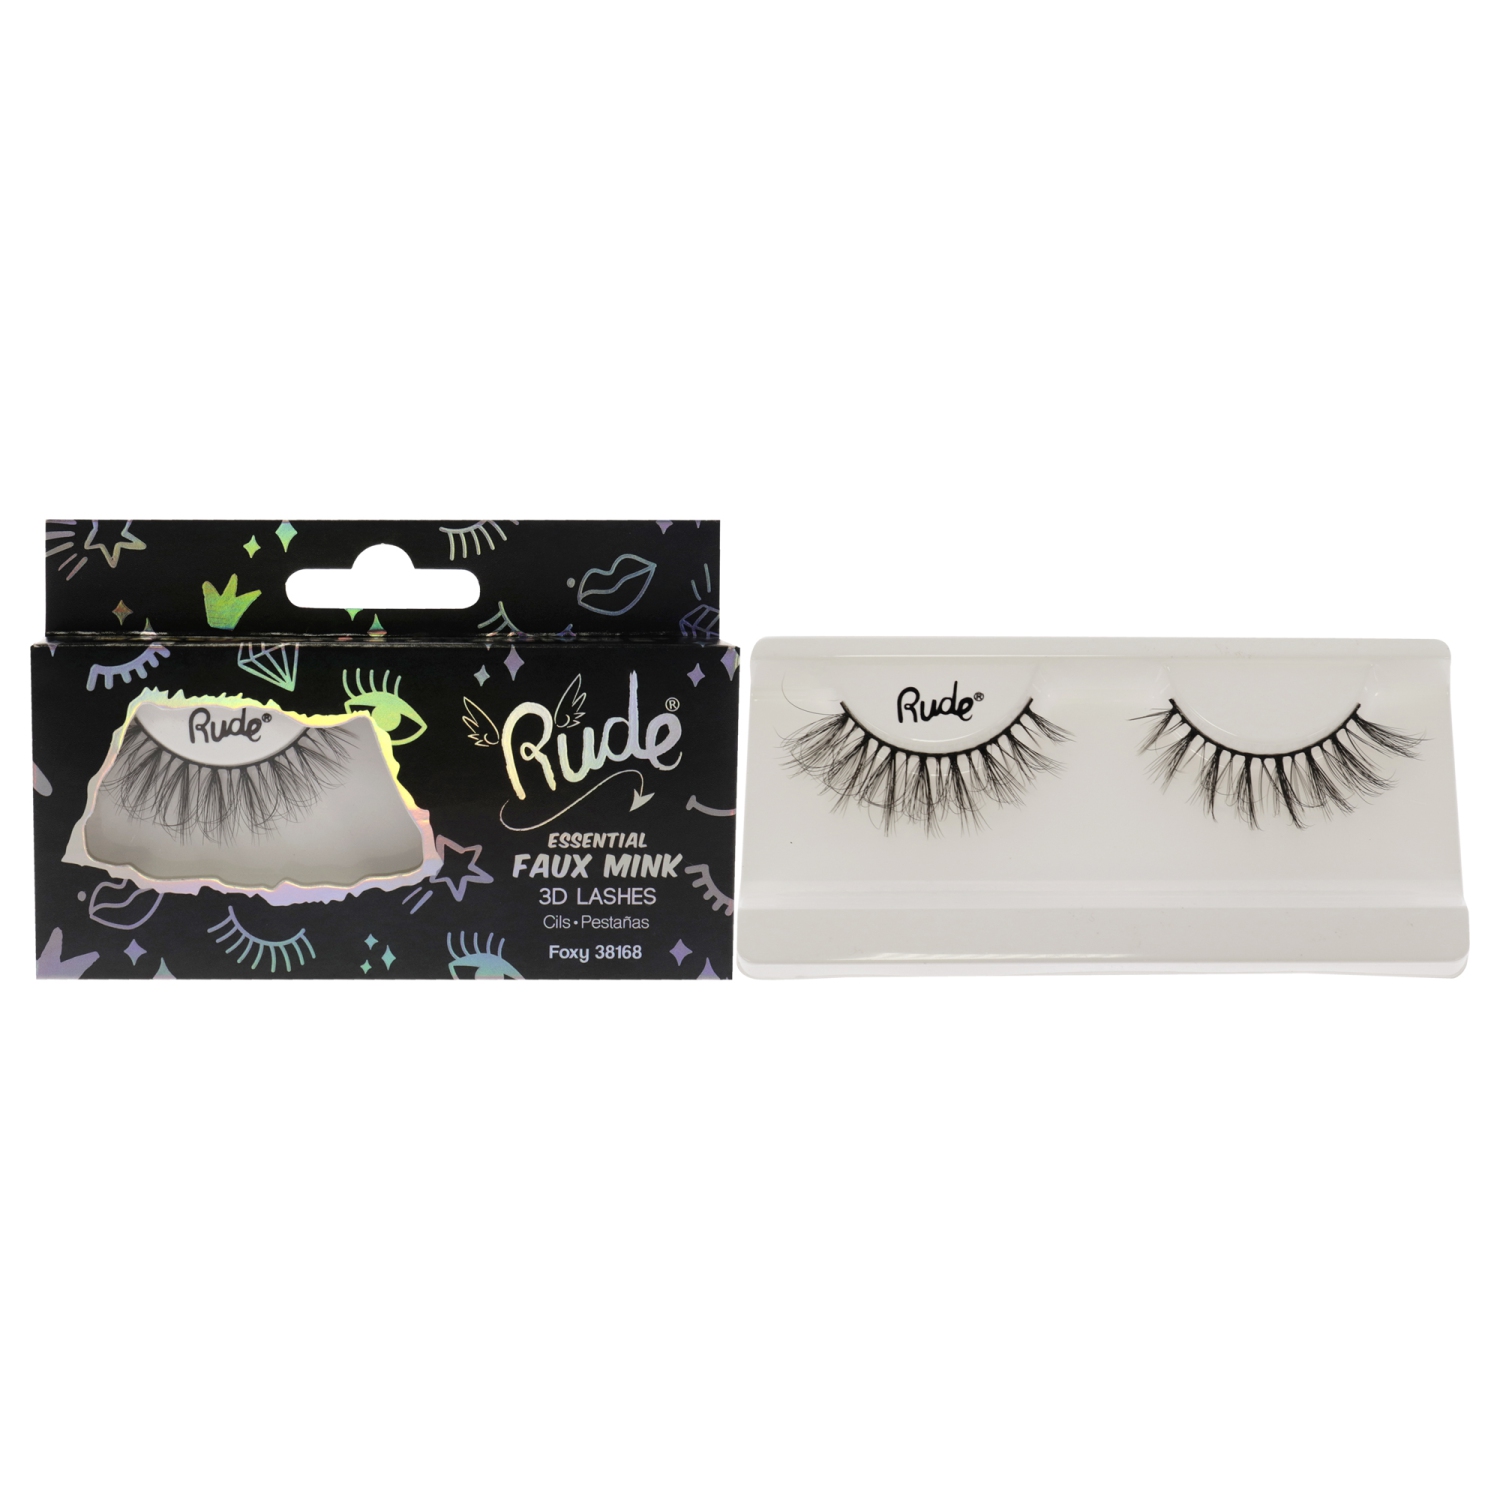 Essential Faux Mink 3D Lashes - Foxy by Rude Cosmetics for Women - 1 Pc Pair